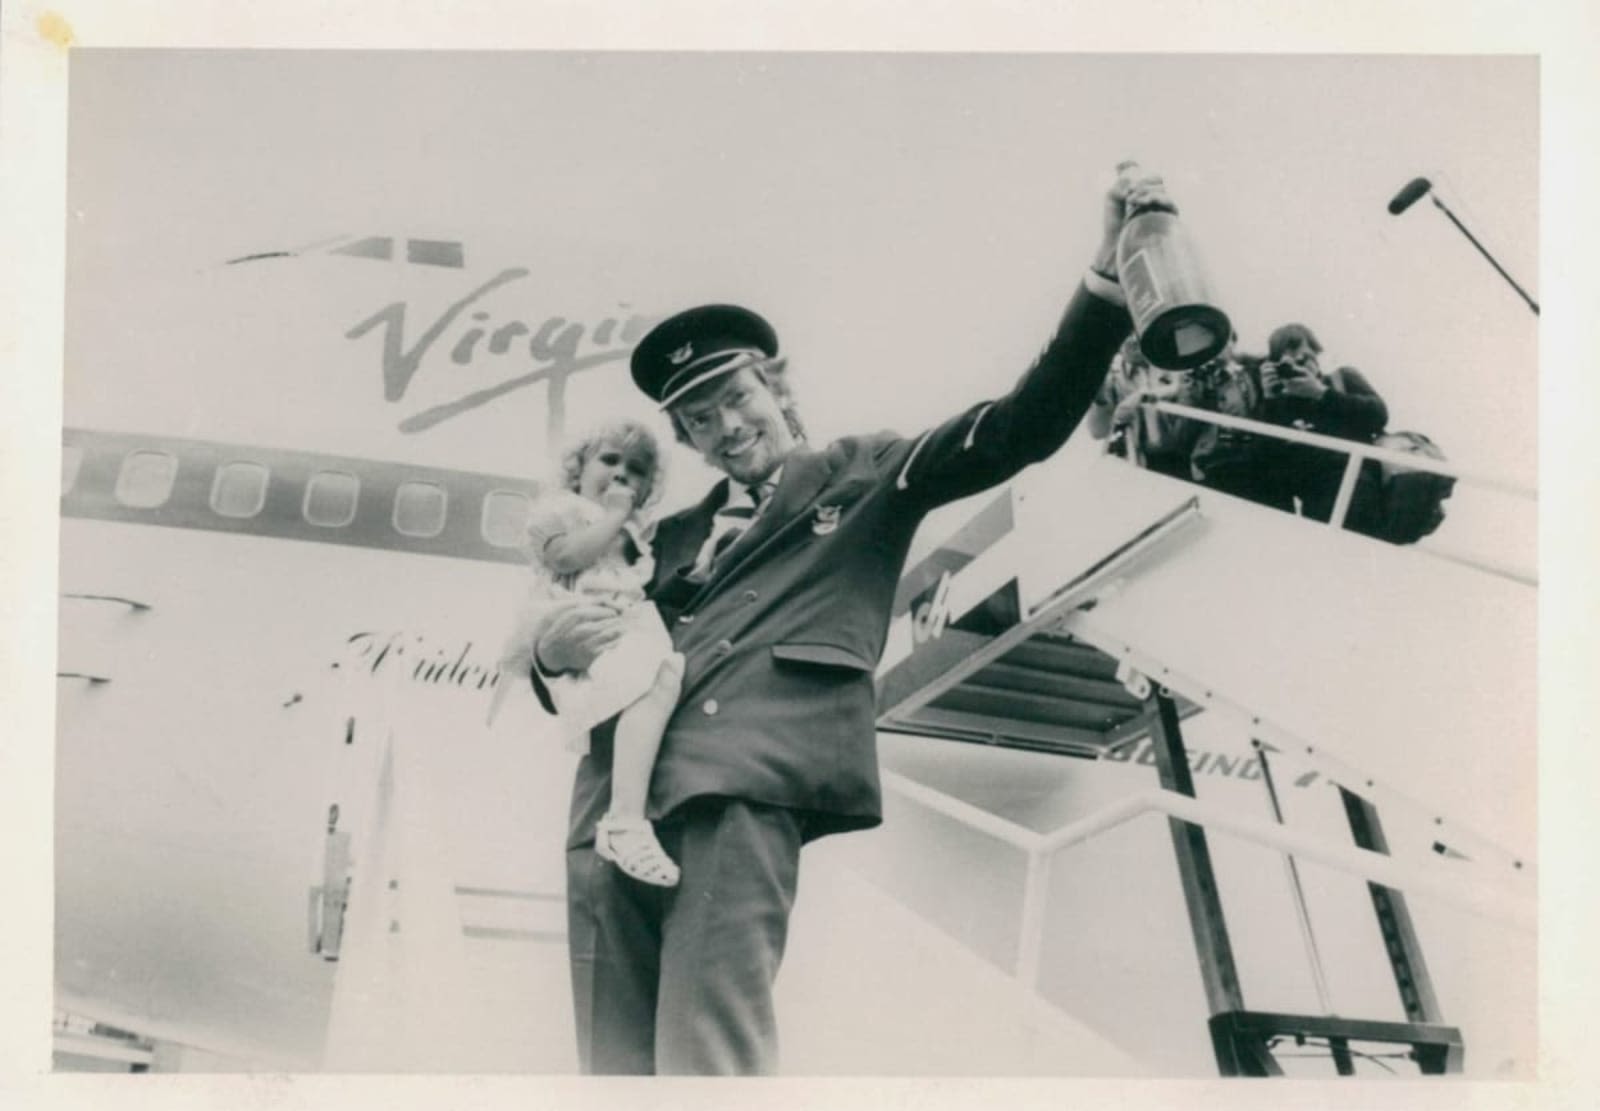 Black and white image of Richard Branson dressed as a pilot, holding Holly and a bottle of champagne, in front of a Virgin aeroplane